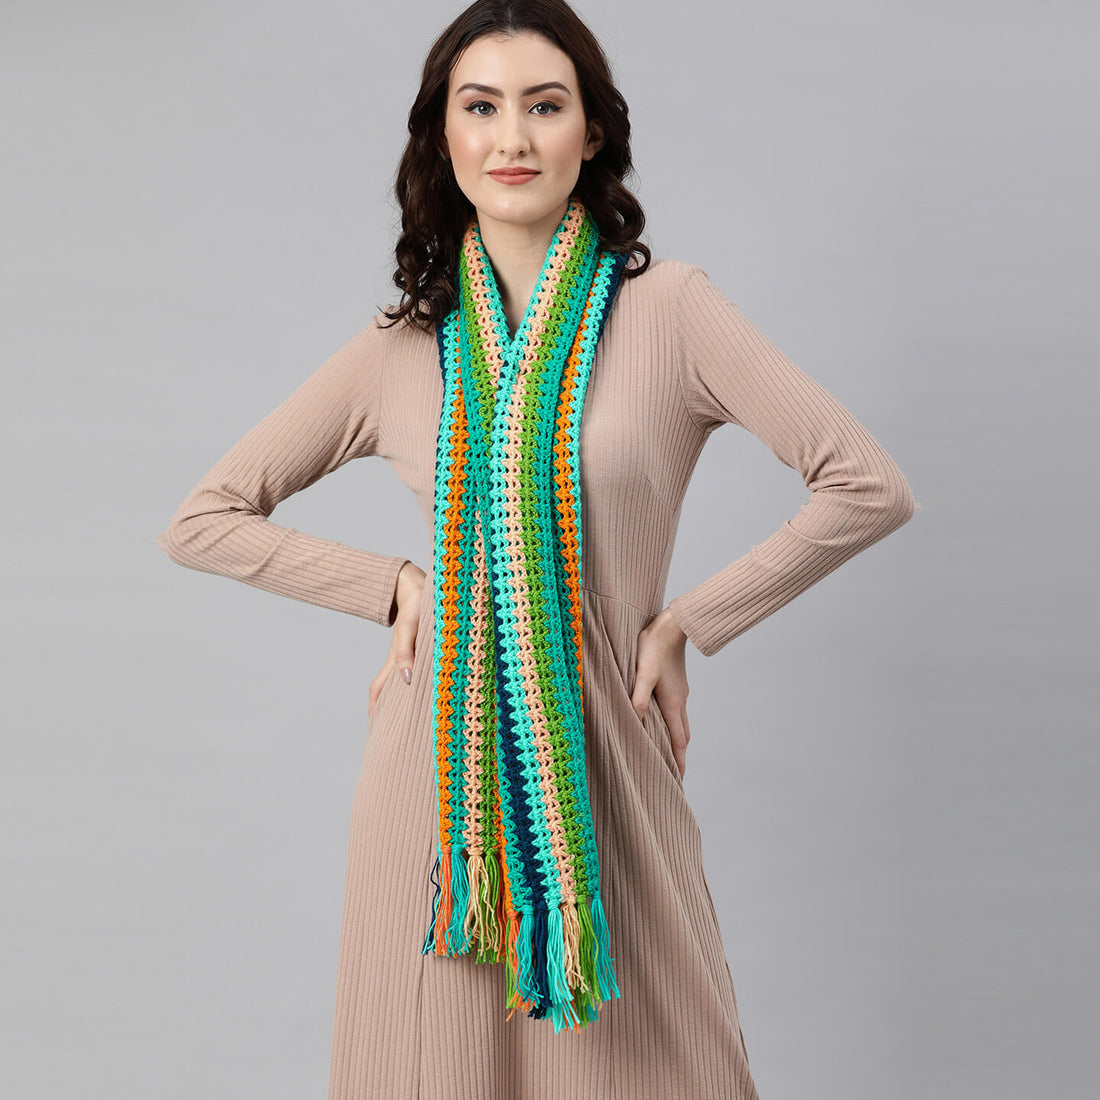 Scarf with Tassels - Multi-Color 2564